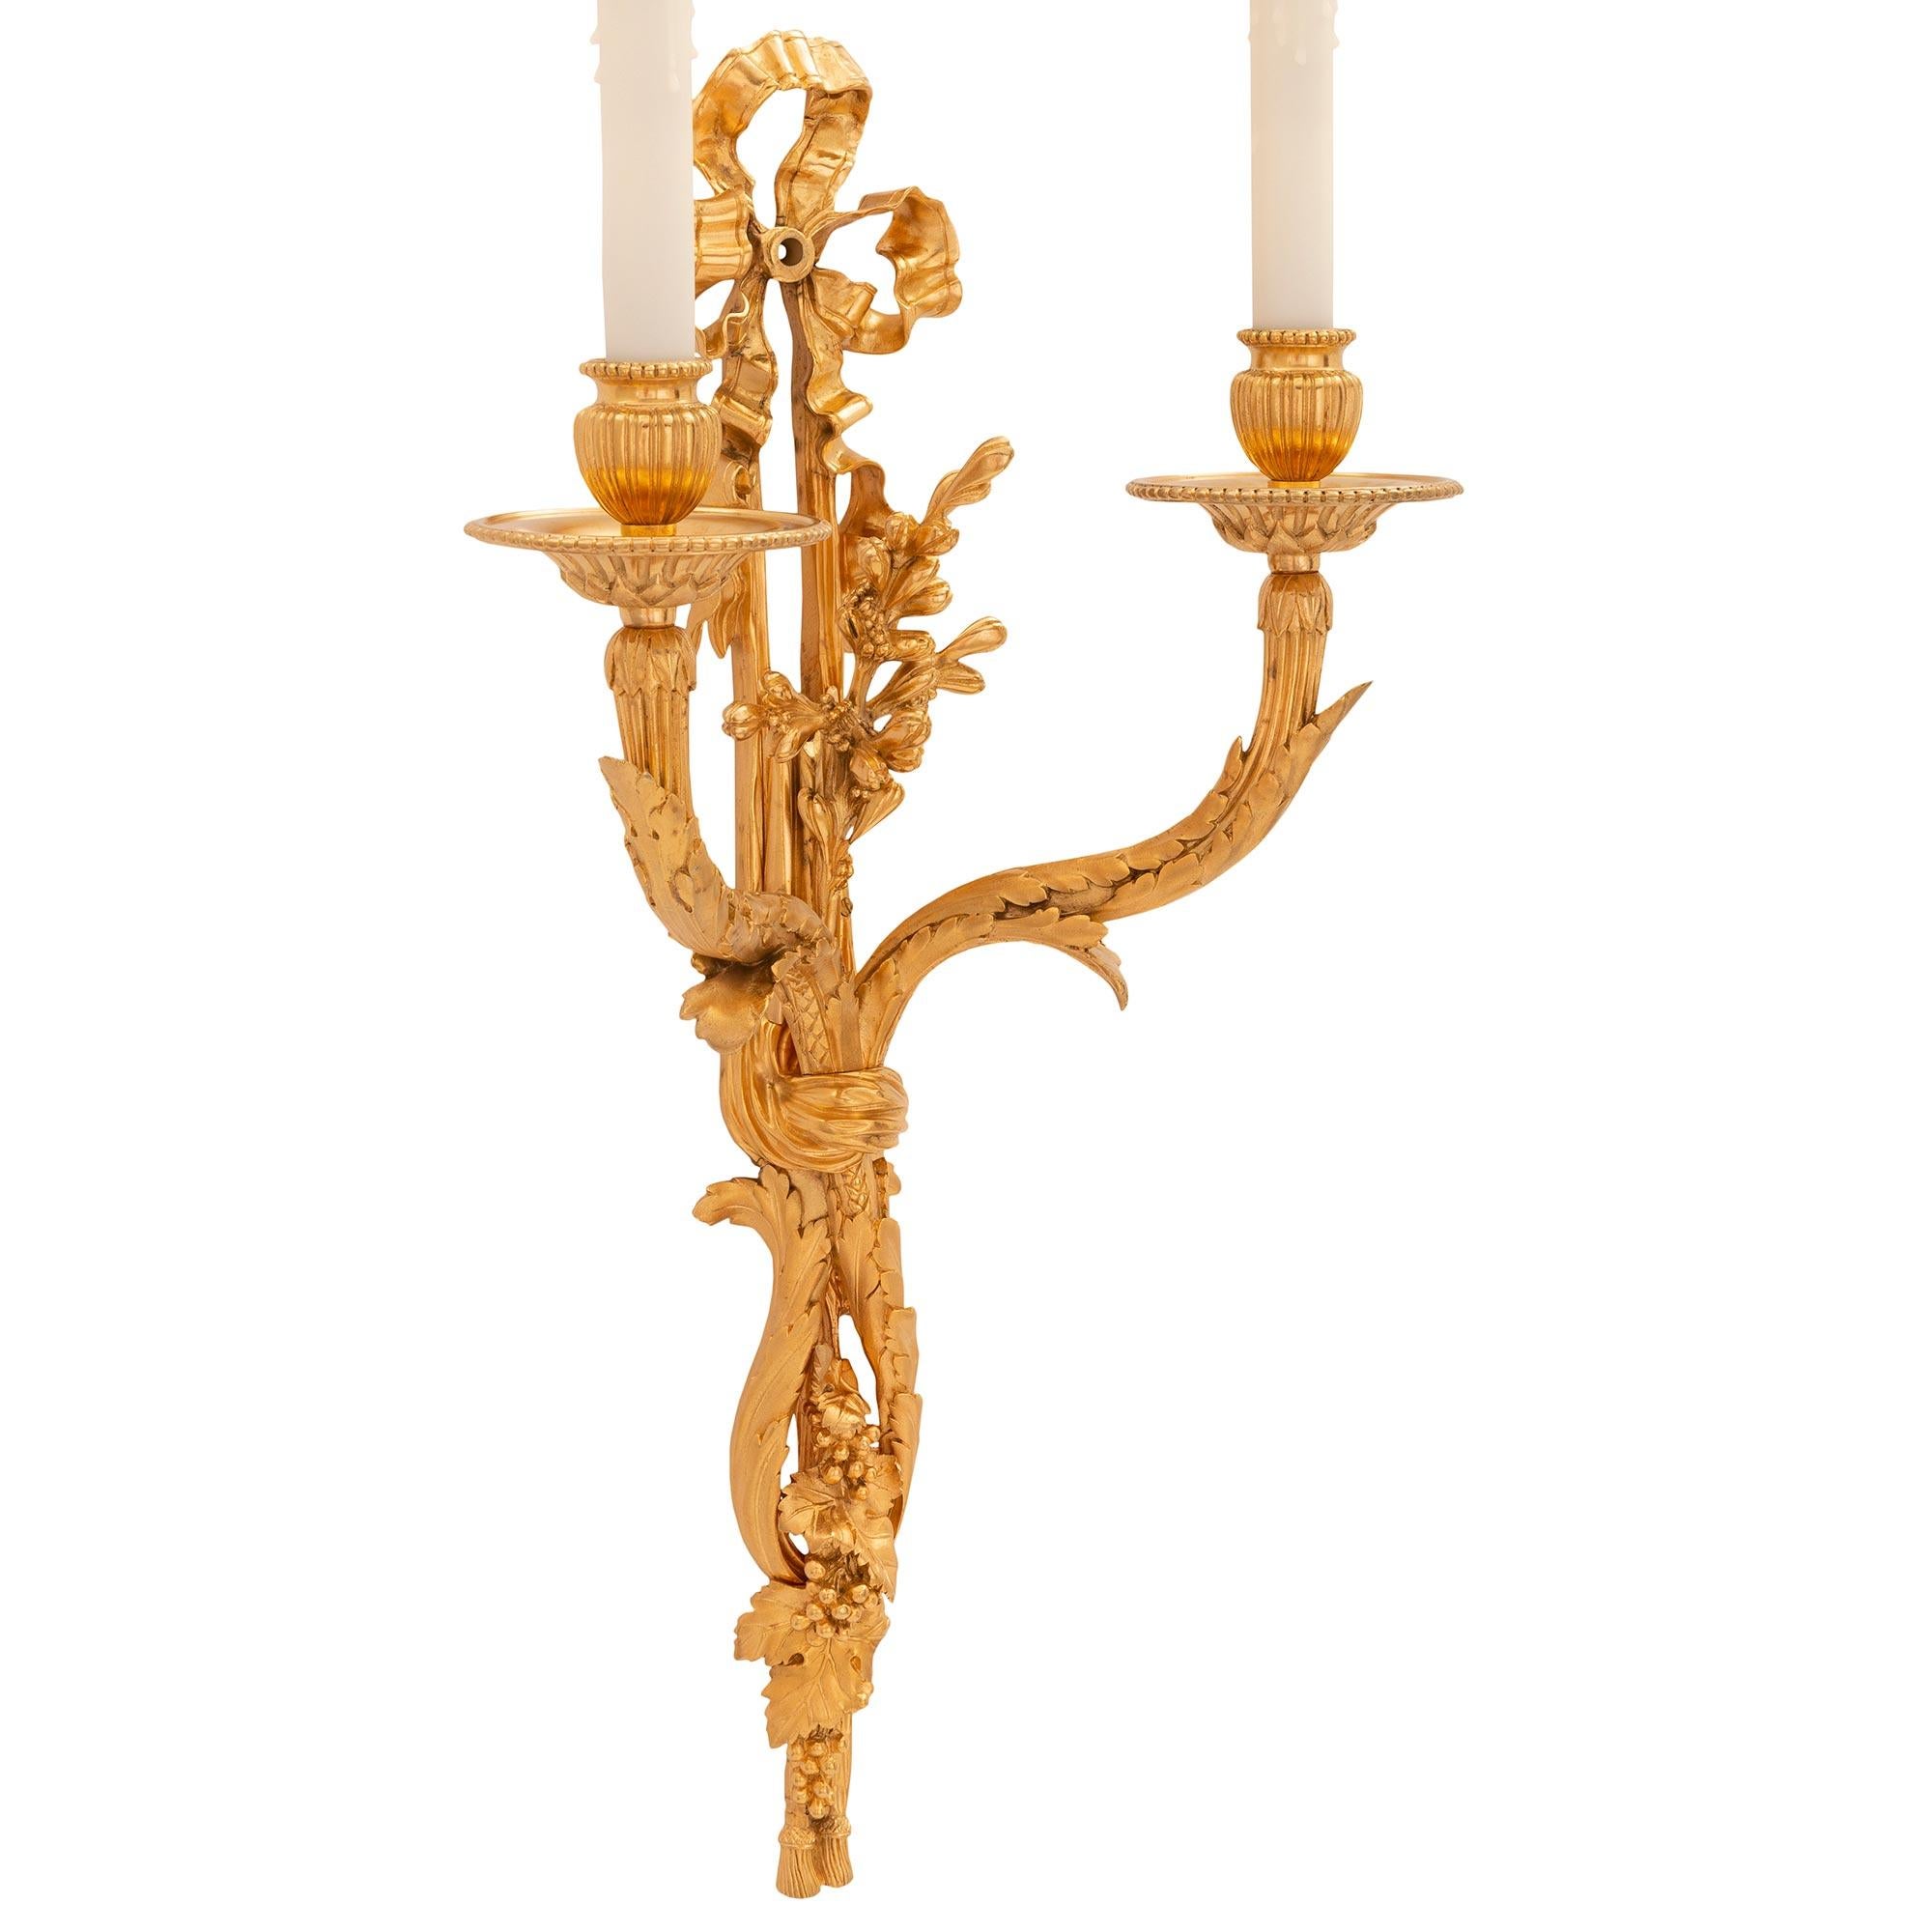 An extremely high quality and rare set of eight French 19th century Louis XVI st. ormolu sconces. Each two arm sconce displays sensationally chased grapes and vines below the scrolled reeded arms, decorated with large overlapping acanthus leaves.